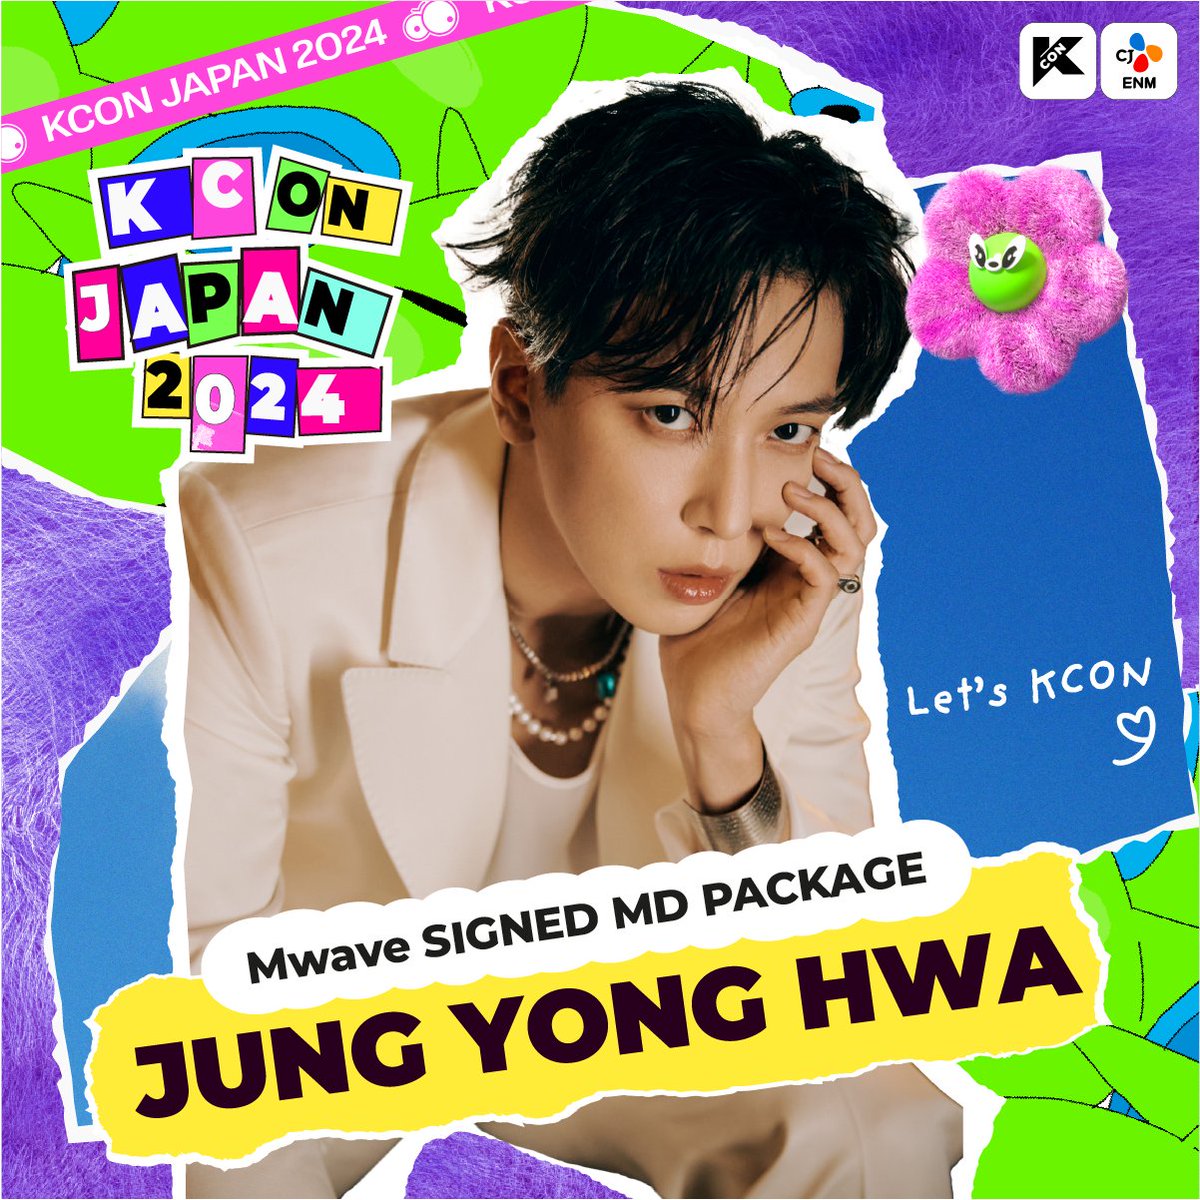 [KCON JAPAN 2024 Mwave Signed MD Package OPEN]

Check the details of Signed MD Package by looking at Mwave OFFICIAL WEBSITE!  

▶bit.ly/KCONJAPAN24_JU…
▶~ 5/19 23:59PM (KST) 

#KCON #KCONJAPAN2024 #JUNGYONGHWA